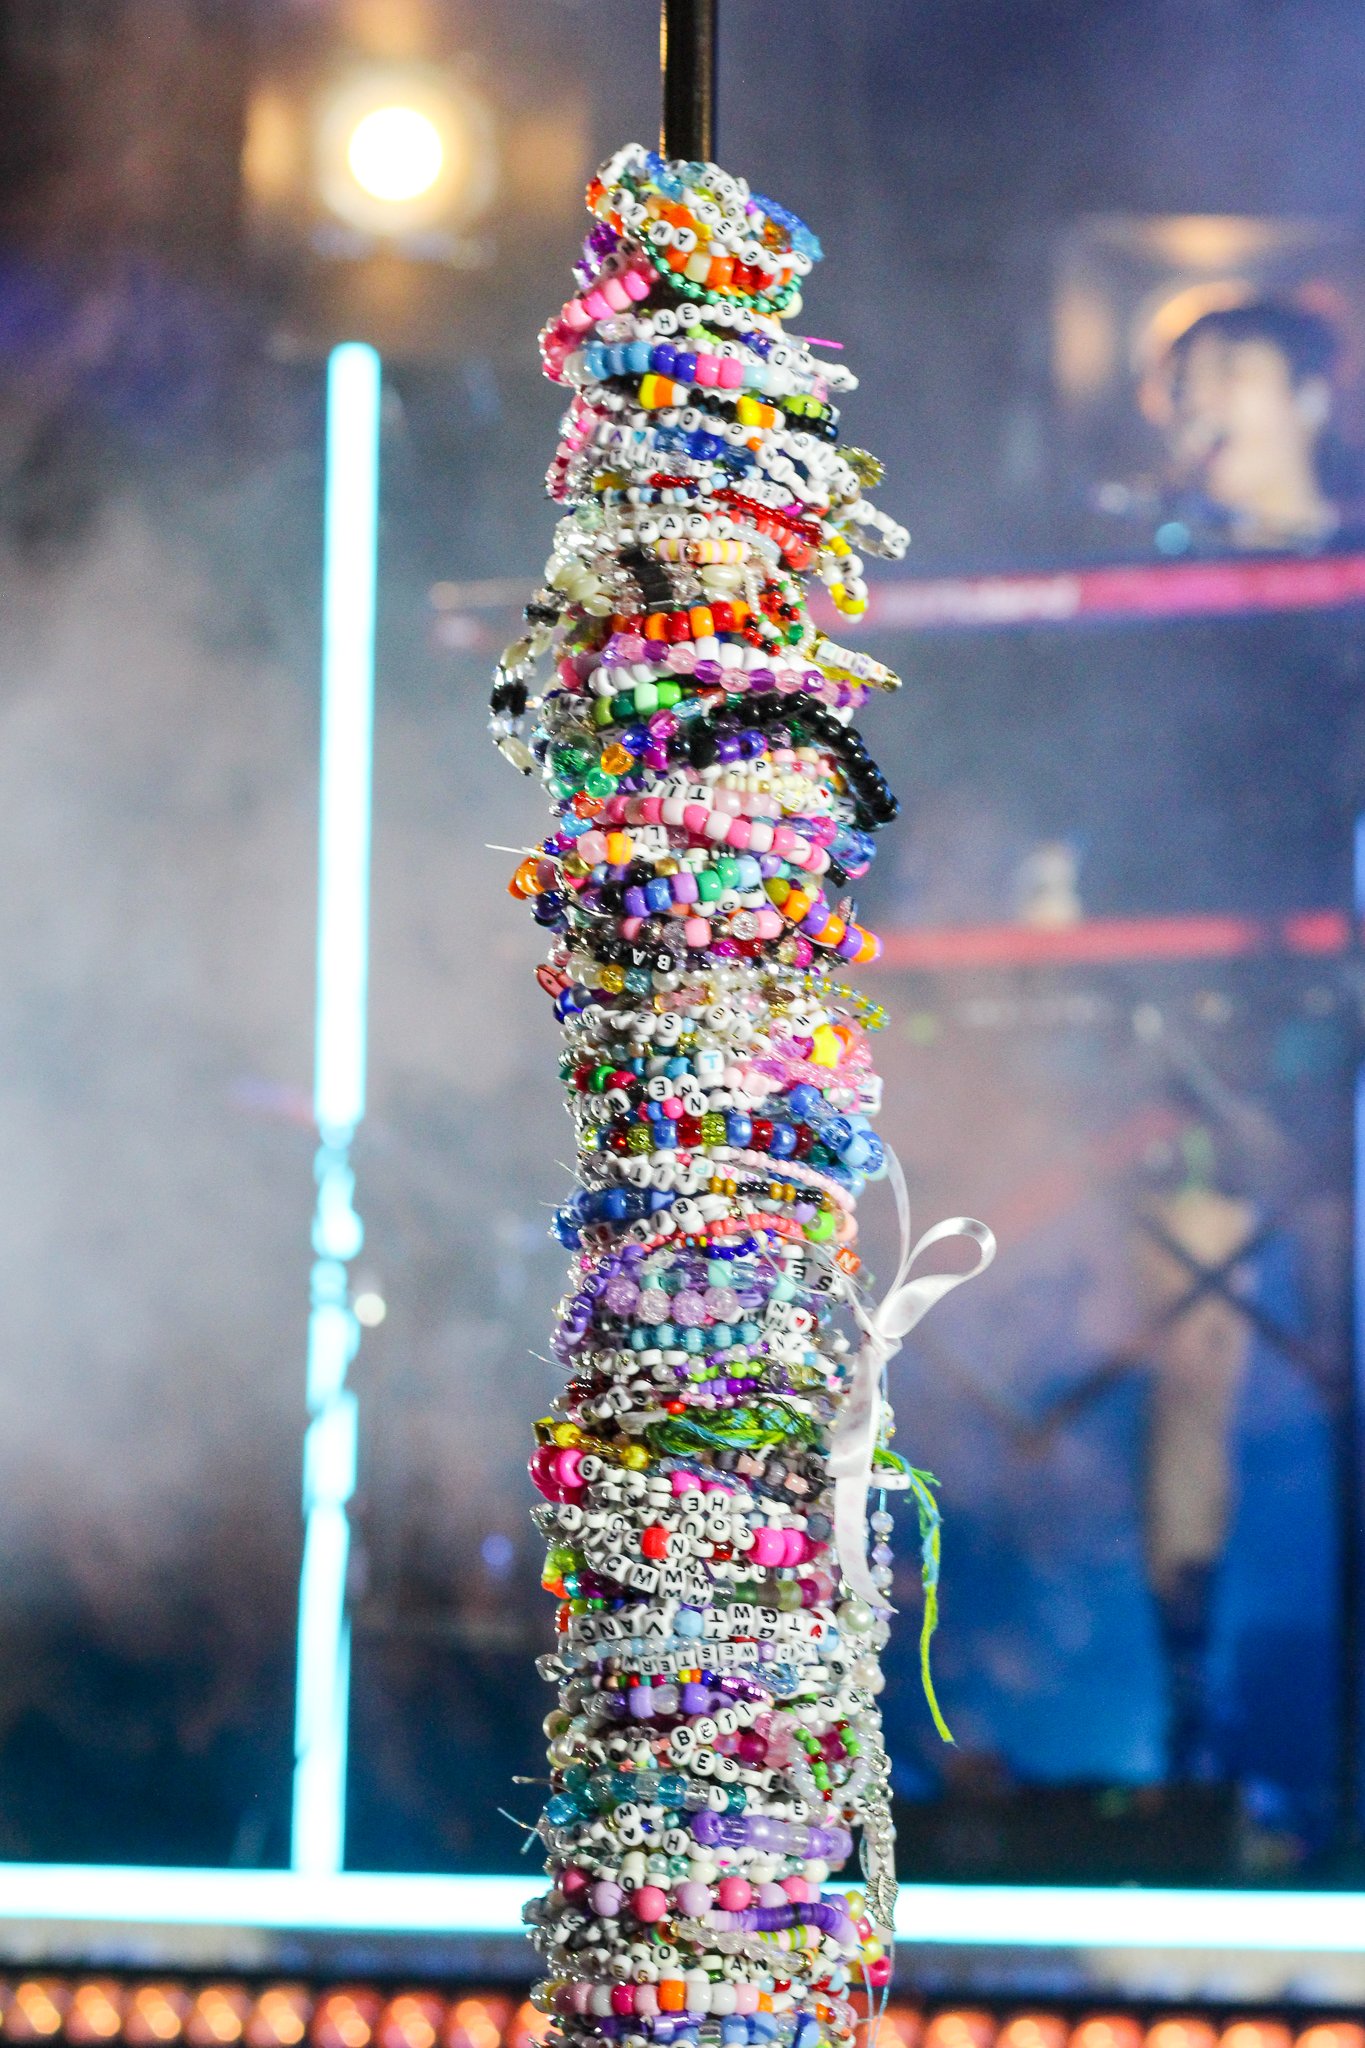  Friendship bracelets decorate Maisie Peters' microphone stand. The singer has collected bracelets from fans since the start of her tour in August. 